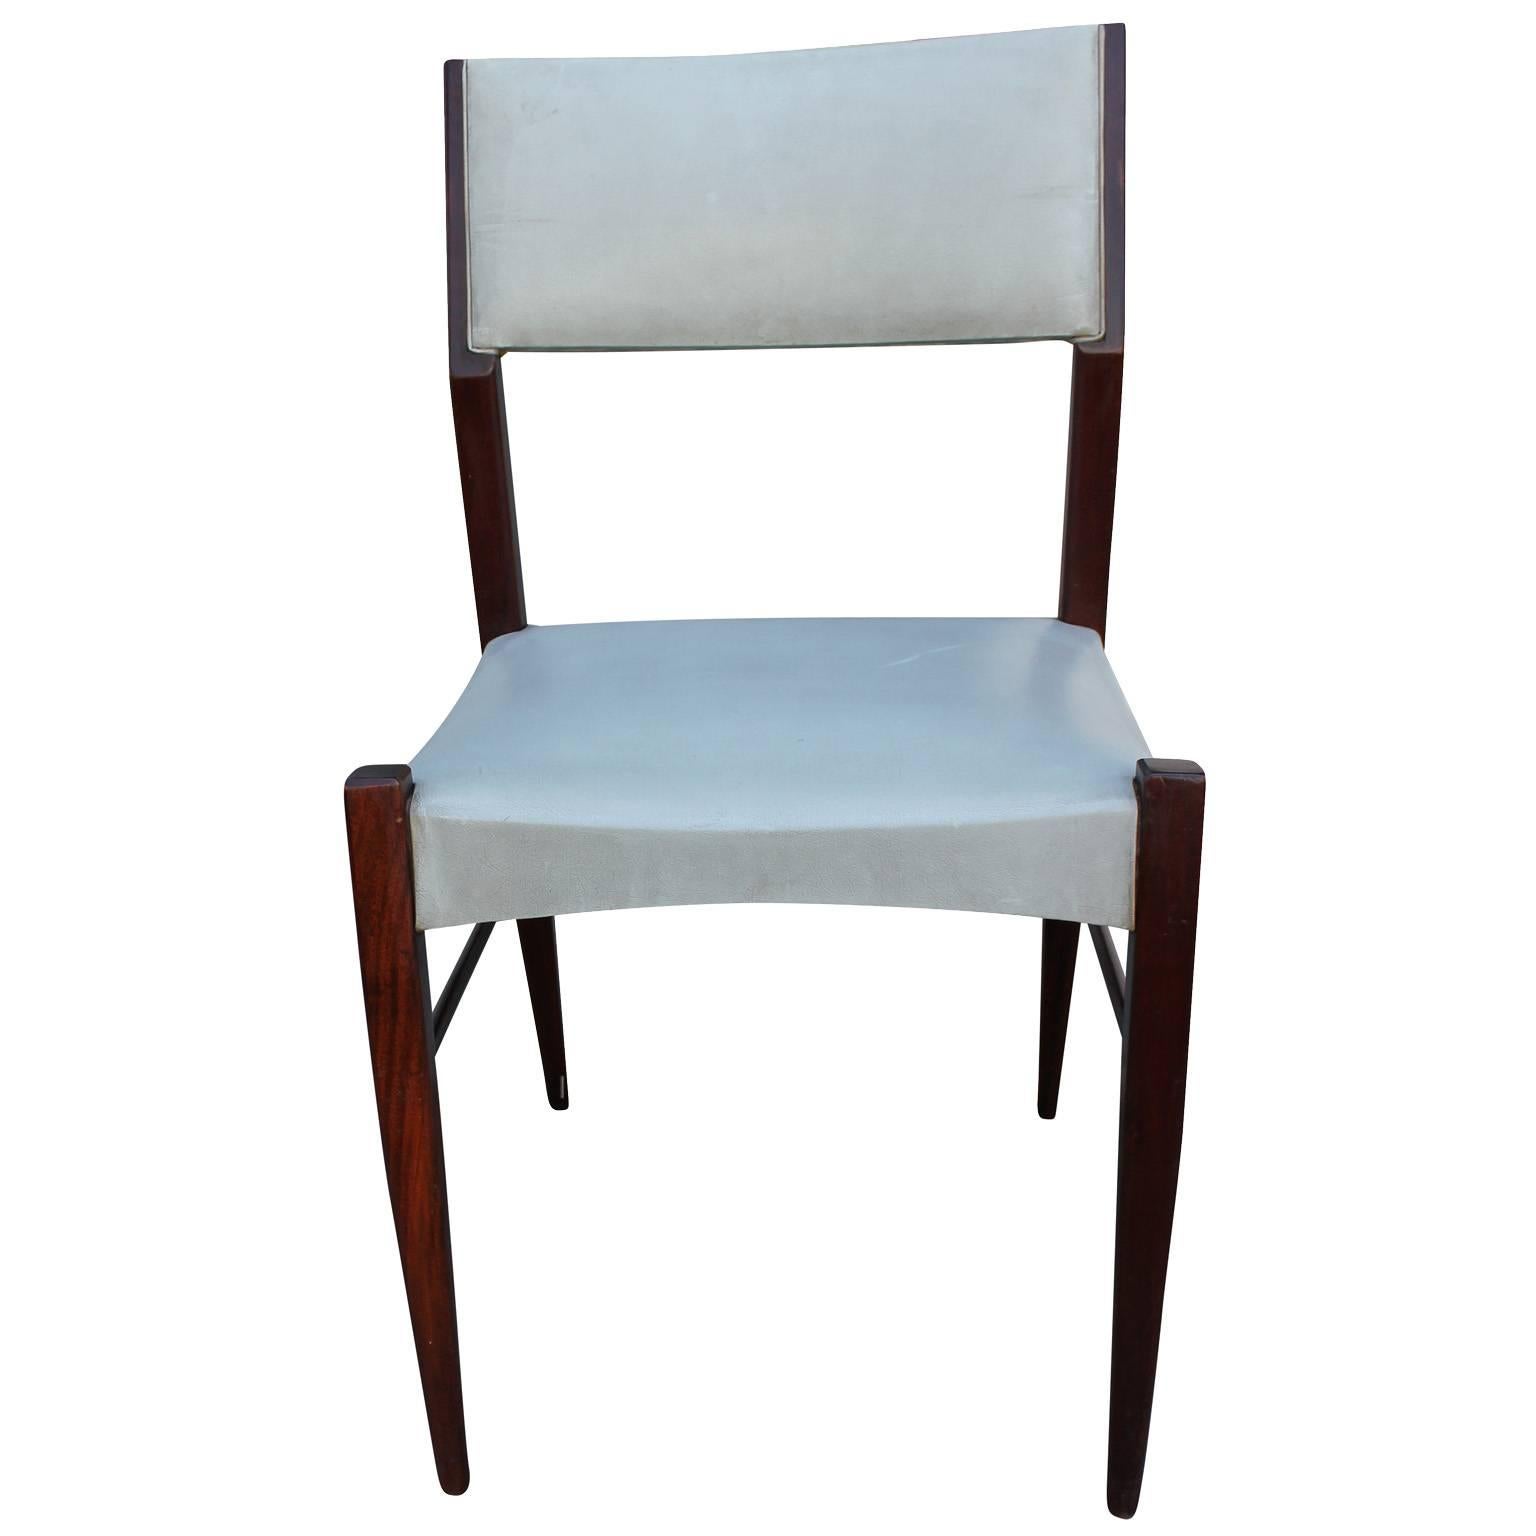 Excellent set of six clean lined, Italian dining chairs. Angular frames are finished in a dark, almost ebony walnut. Chairs are upholstered in a grey faux leather which could use updating.